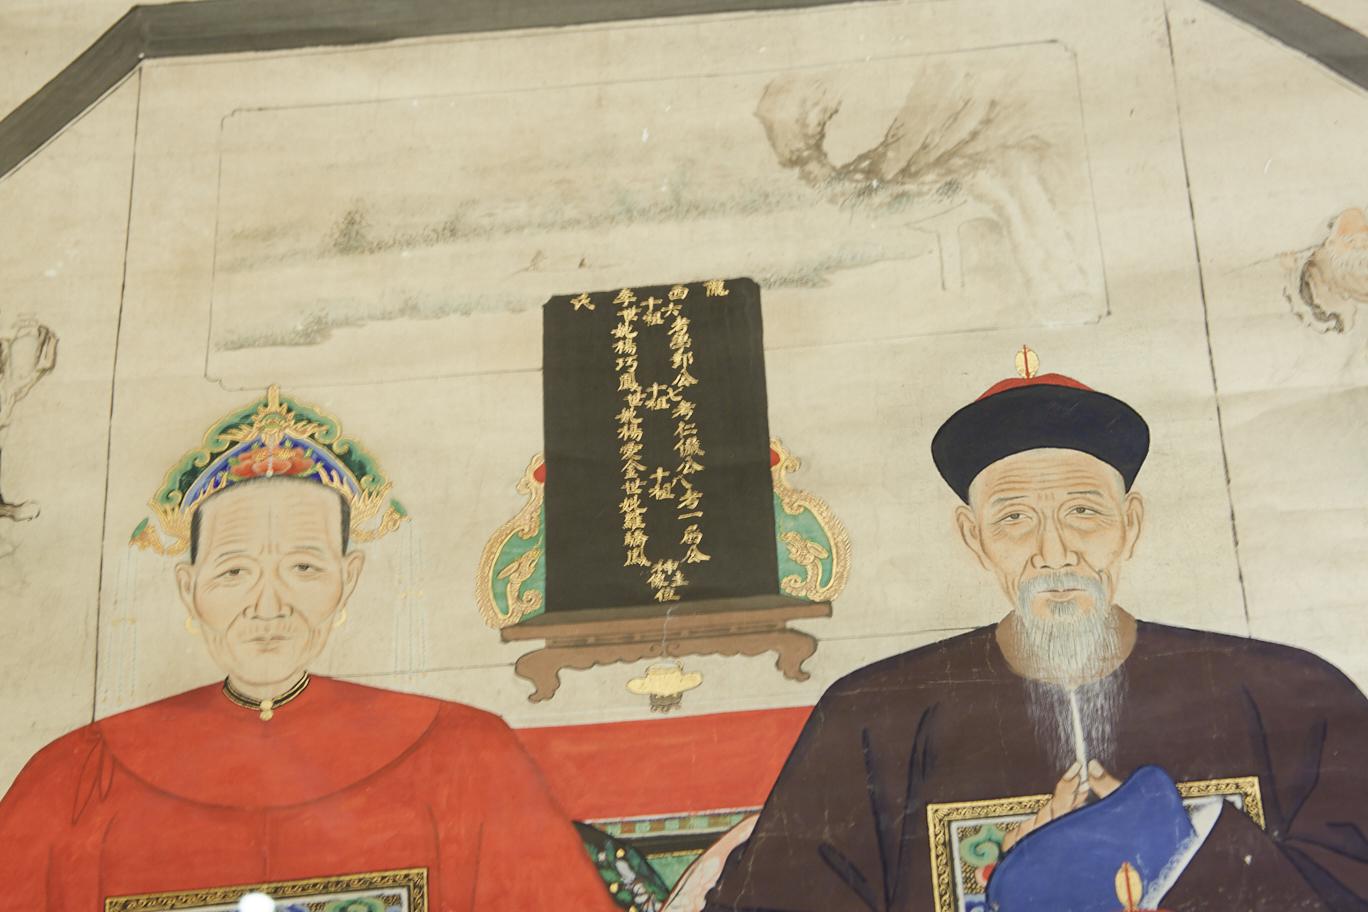 Ancestral Chinese portrait in new custom frame. Four figures are posed in front of a screen that describes persons of rank. Placement of figures and detail of chair legs illustrates conceptual perspective.